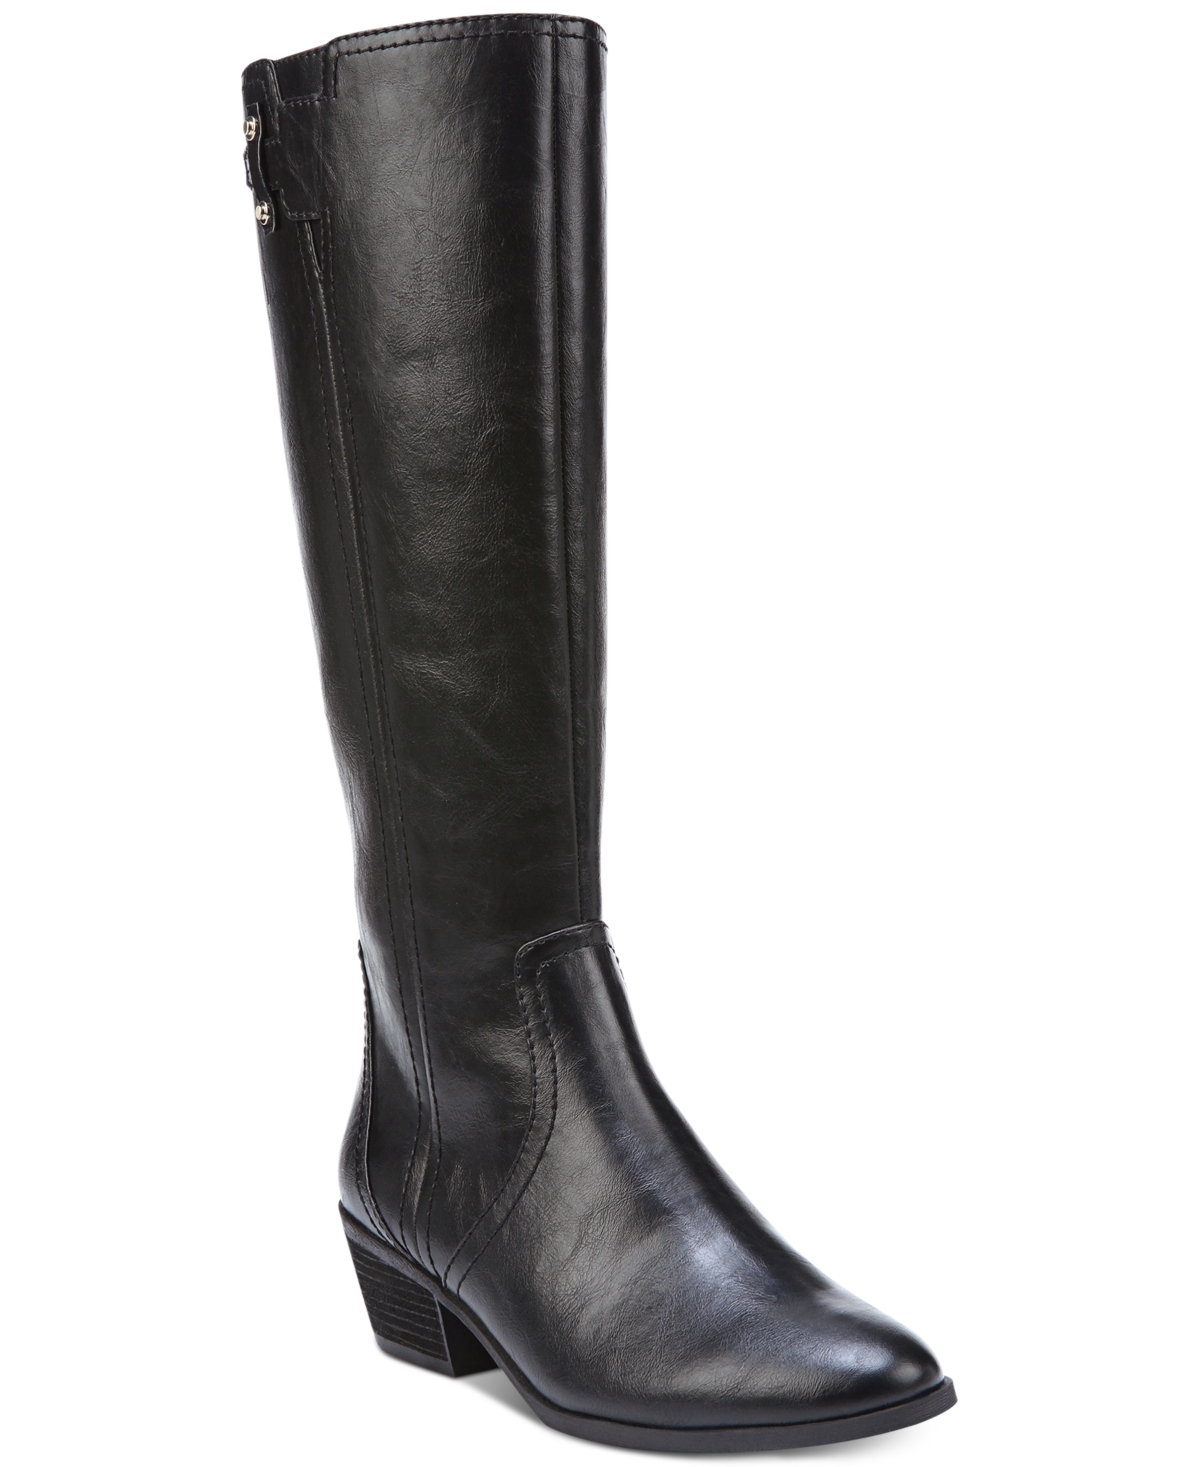 Dr. Scholl's Women's Brilliance Tall Boots In Black Faux Leather